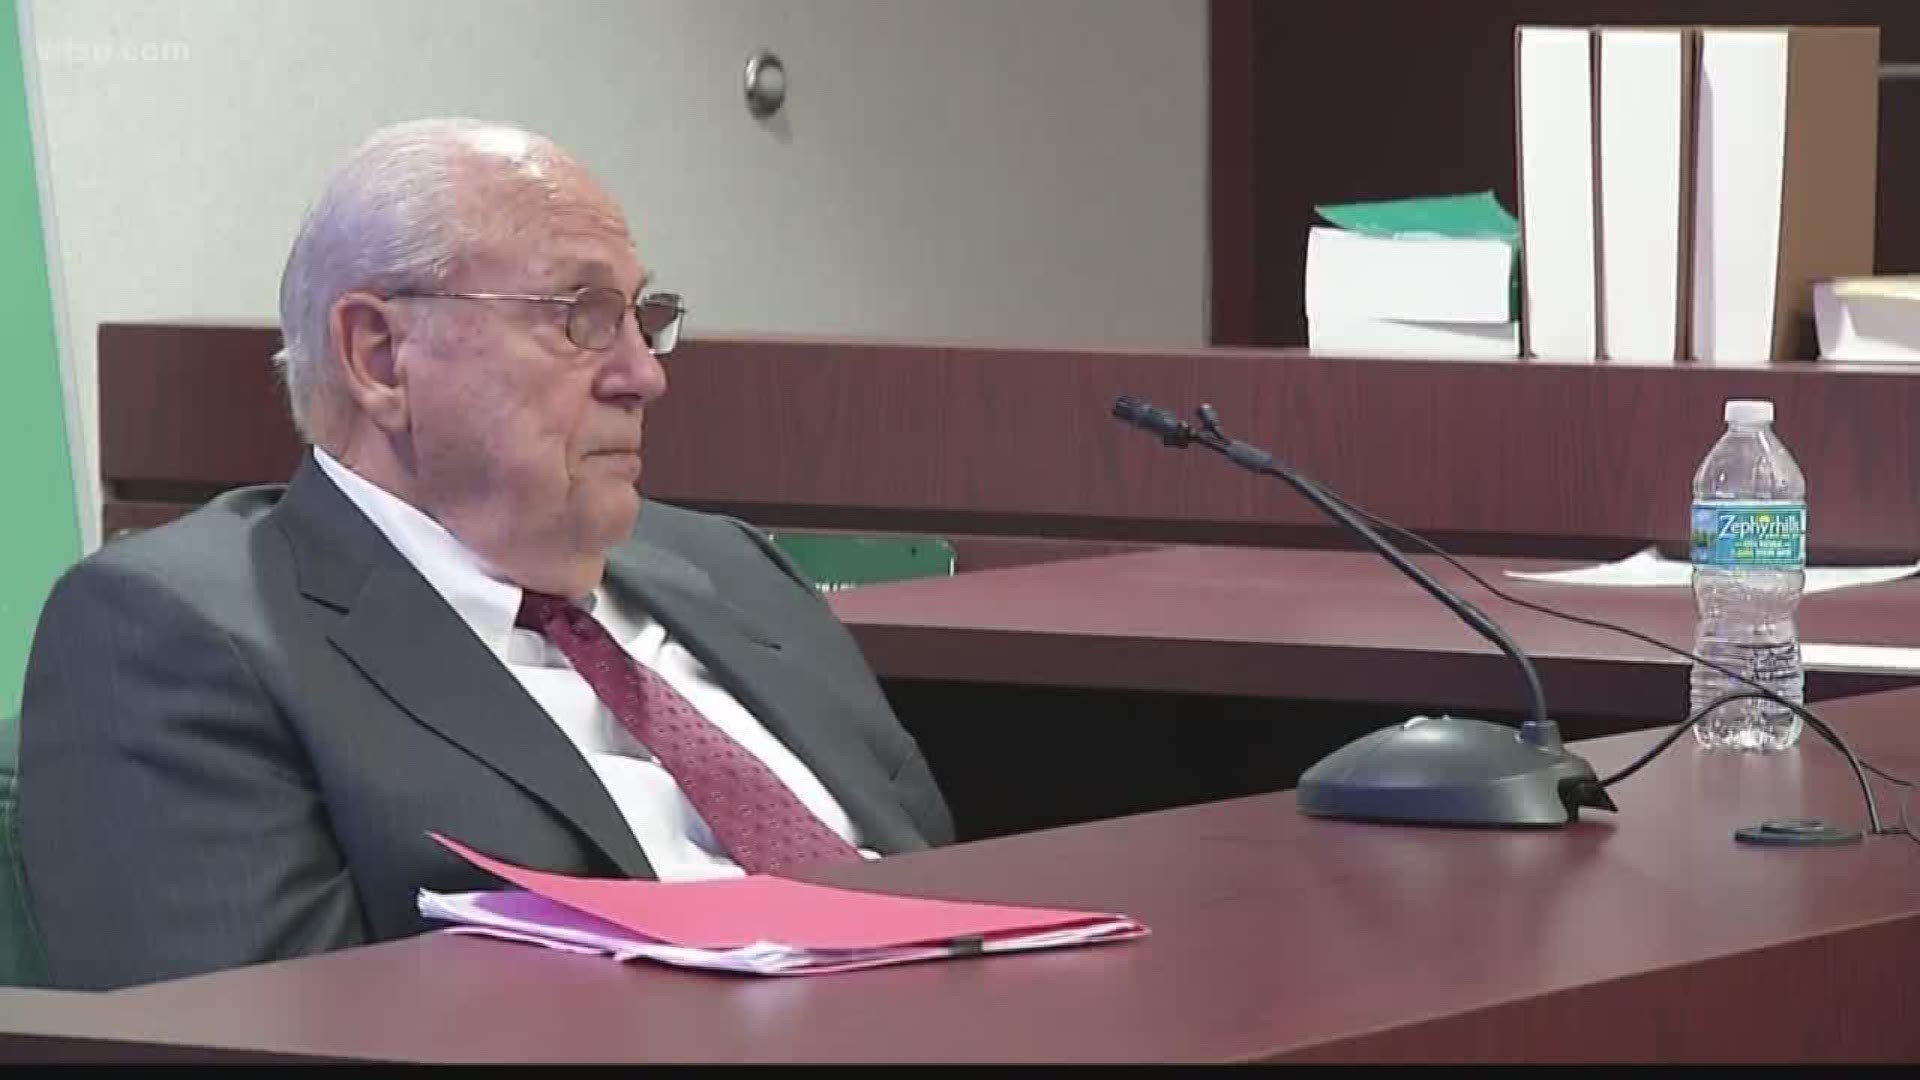 The Pasco County movie theater shooter was denied a motion that would have modified the conditions of his pretrial release.

On Friday, Judge Kemba Lewis denied Curtis Reeves’ motion that would have allowed him to leave his home with fewer restrictions and give up his ankle monitor.

Earlier this month, Reeves’ defense team argued he behaved so well these past five years there’s no reason to continue monitoring him.

Prosecutors disagreed, calling the 76-year-old former Tampa police captain an o